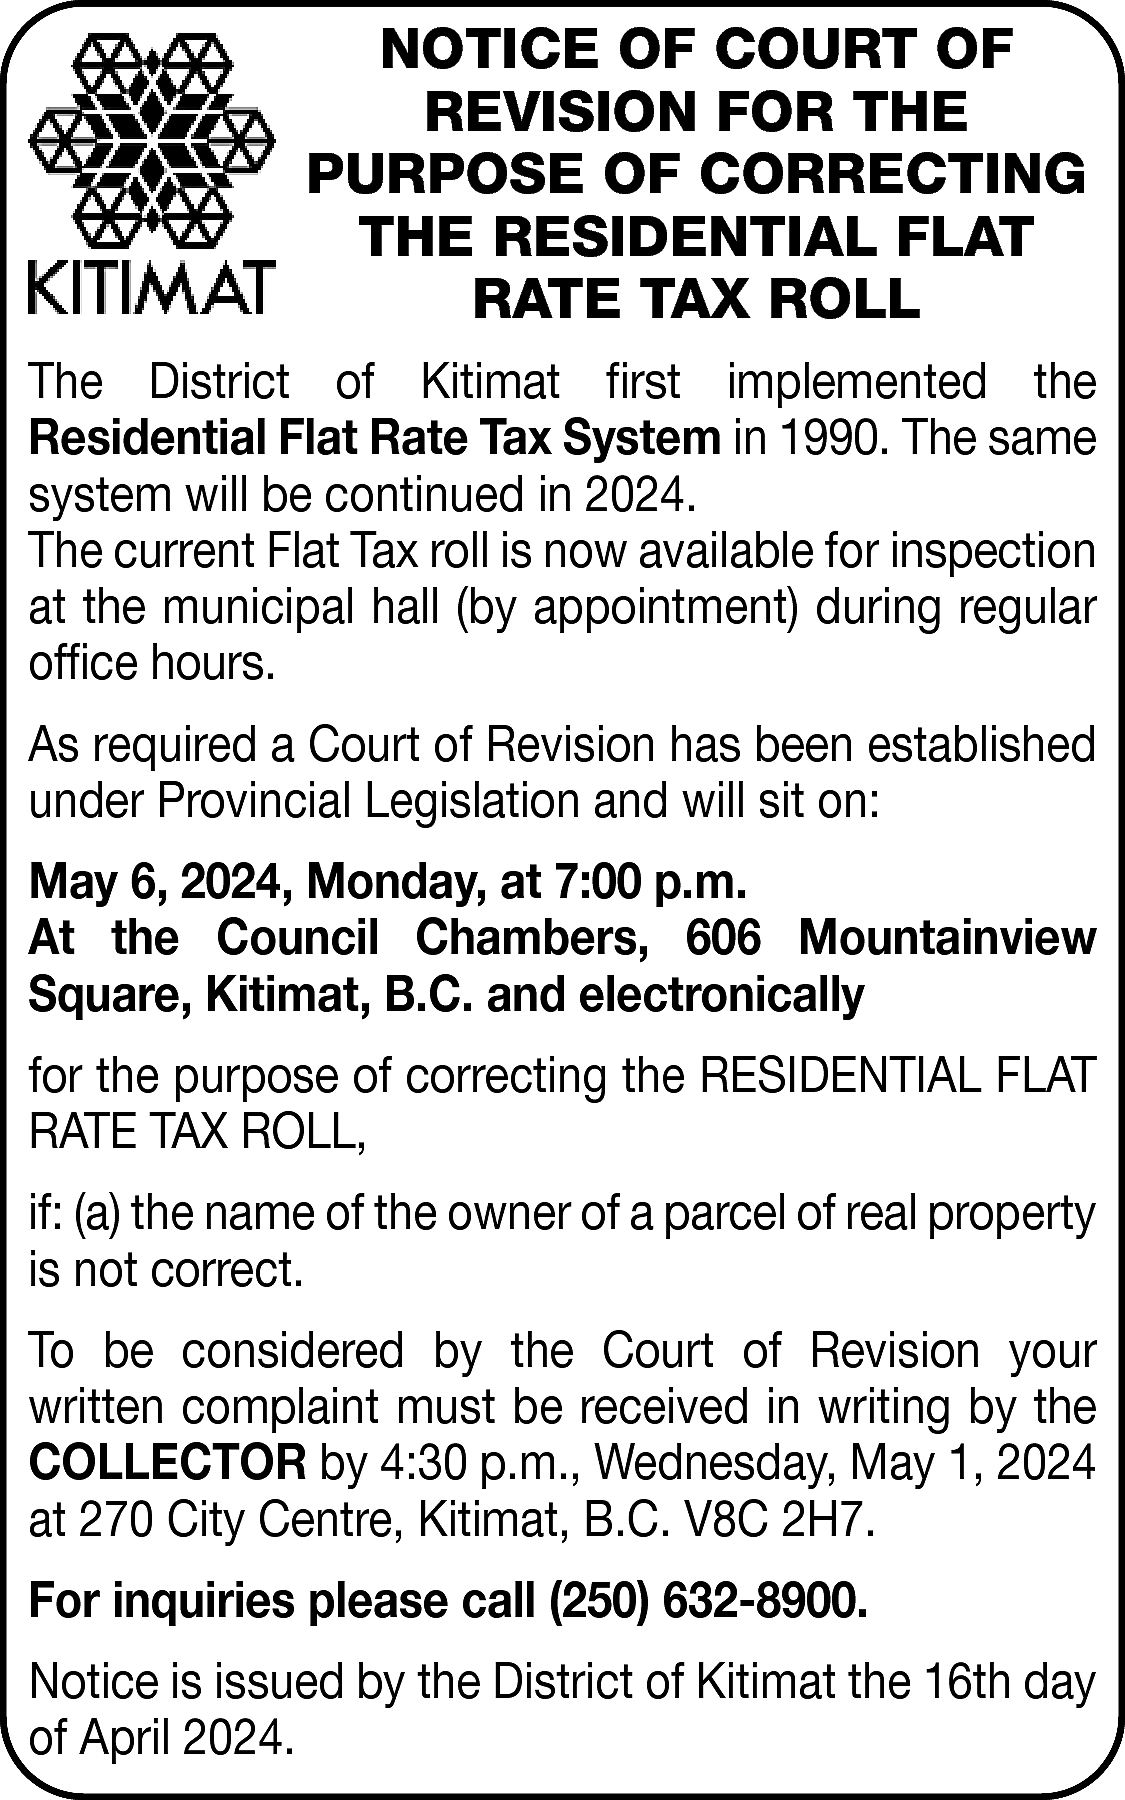 NOTICE OF COURT OF <br>REVISION  NOTICE OF COURT OF  REVISION FOR THE  PURPOSE OF CORRECTING  THE RESIDENTIAL FLAT  RATE TAX ROLL  The District of Kitimat first implemented the  Residential Flat Rate Tax System in 1990. The same  system will be continued in 2024.  The current Flat Tax roll is now available for inspection  at the municipal hall (by appointment) during regular  office hours.  As required a Court of Revision has been established  under Provincial Legislation and will sit on:  May 6, 2024, Monday, at 7:00 p.m.  At the Council Chambers, 606 Mountainview  Square, Kitimat, B.C. and electronically  for the purpose of correcting the RESIDENTIAL FLAT  RATE TAX ROLL,  if: (a) the name of the owner of a parcel of real property  is not correct.  To be considered by the Court of Revision your  written complaint must be received in writing by the  COLLECTOR by 4:30 p.m., Wednesday, May 1, 2024  at 270 City Centre, Kitimat, B.C. V8C 2H7.  For inquiries please call (250) 632-8900.  Notice is issued by the District of Kitimat the 16th day  of April 2024.    